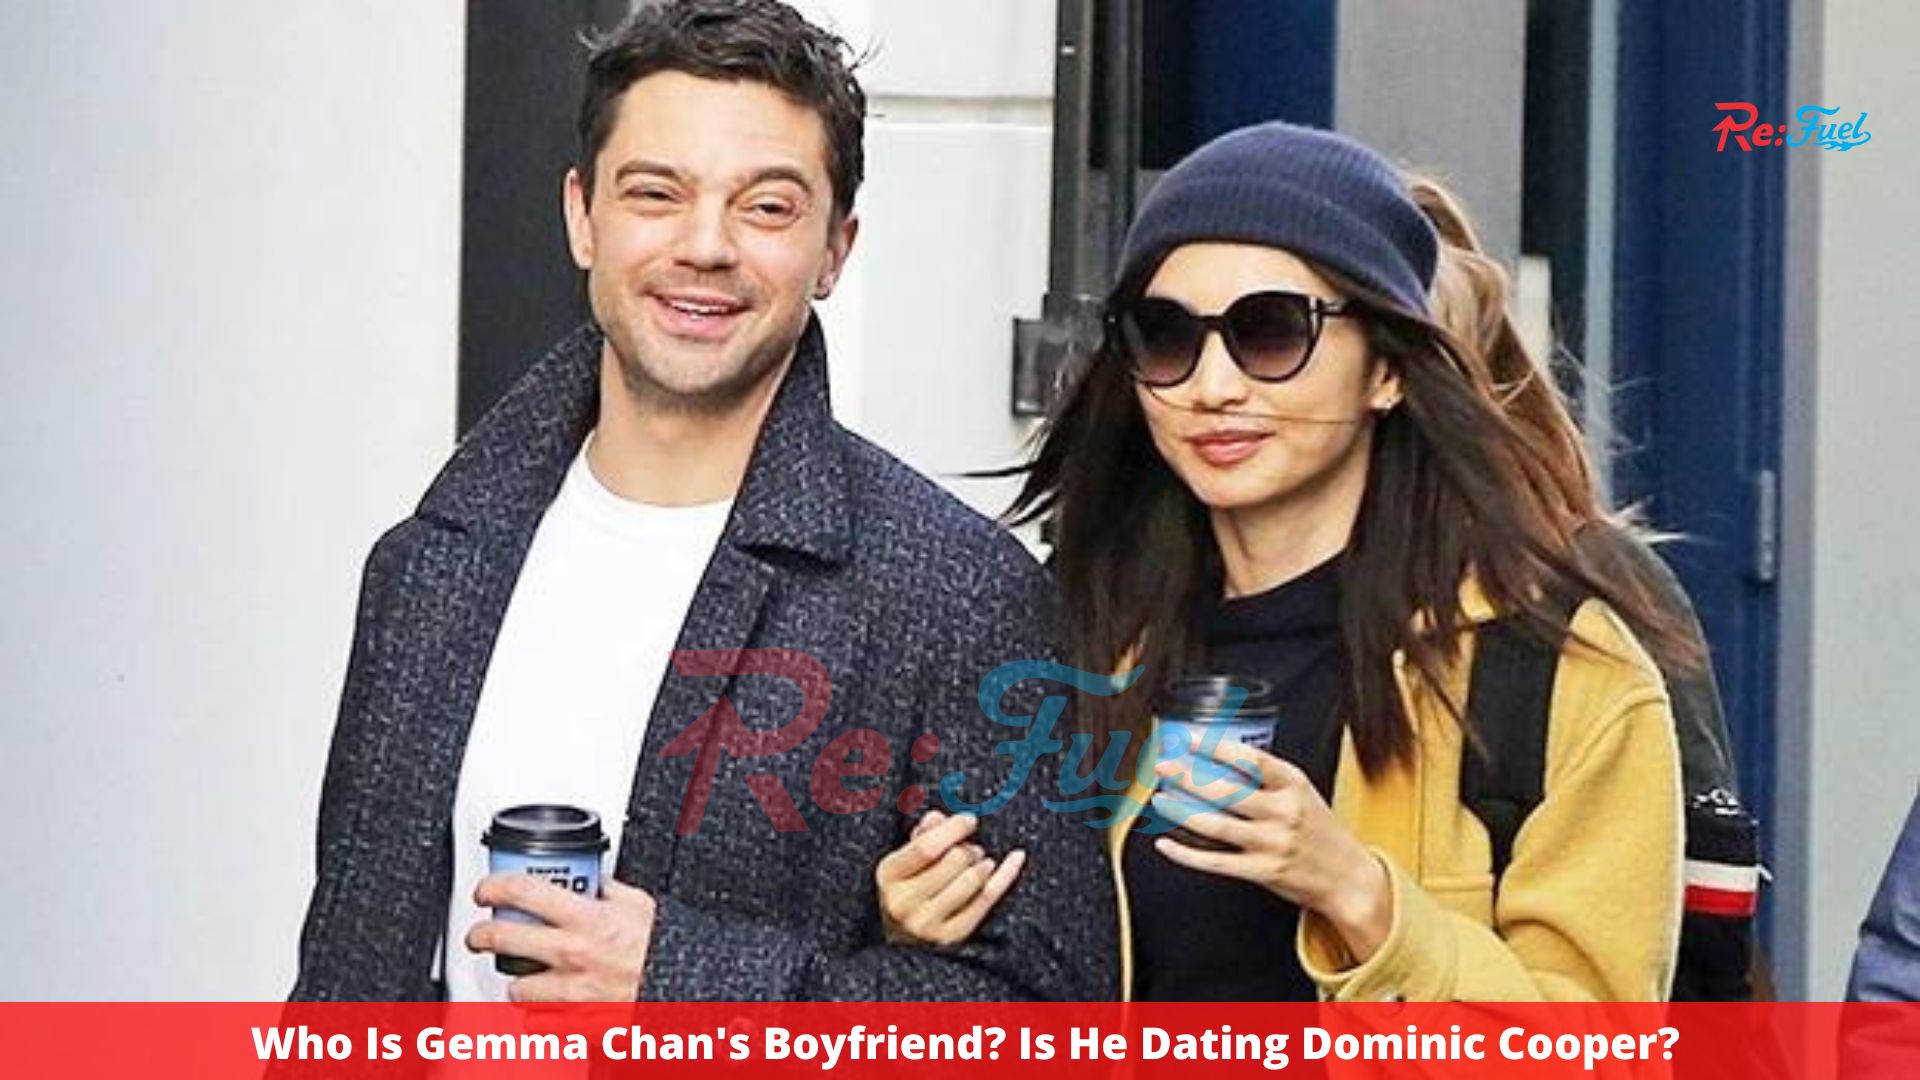 Who Is Gemma Chan's Boyfriend? Is He Dating Dominic Cooper?